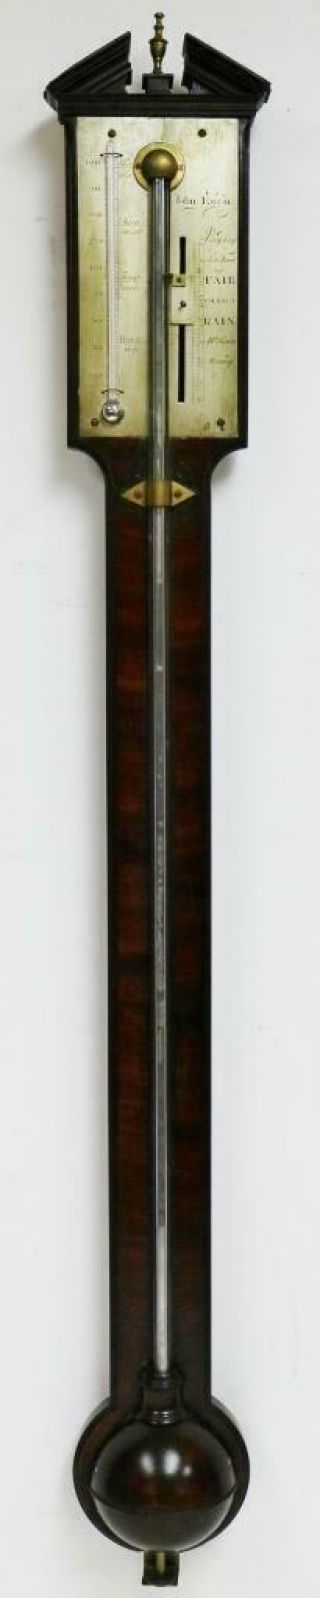 Antique English Solid Mahogany Stick Wall Barometer By John Ewen,  Silvered Dial